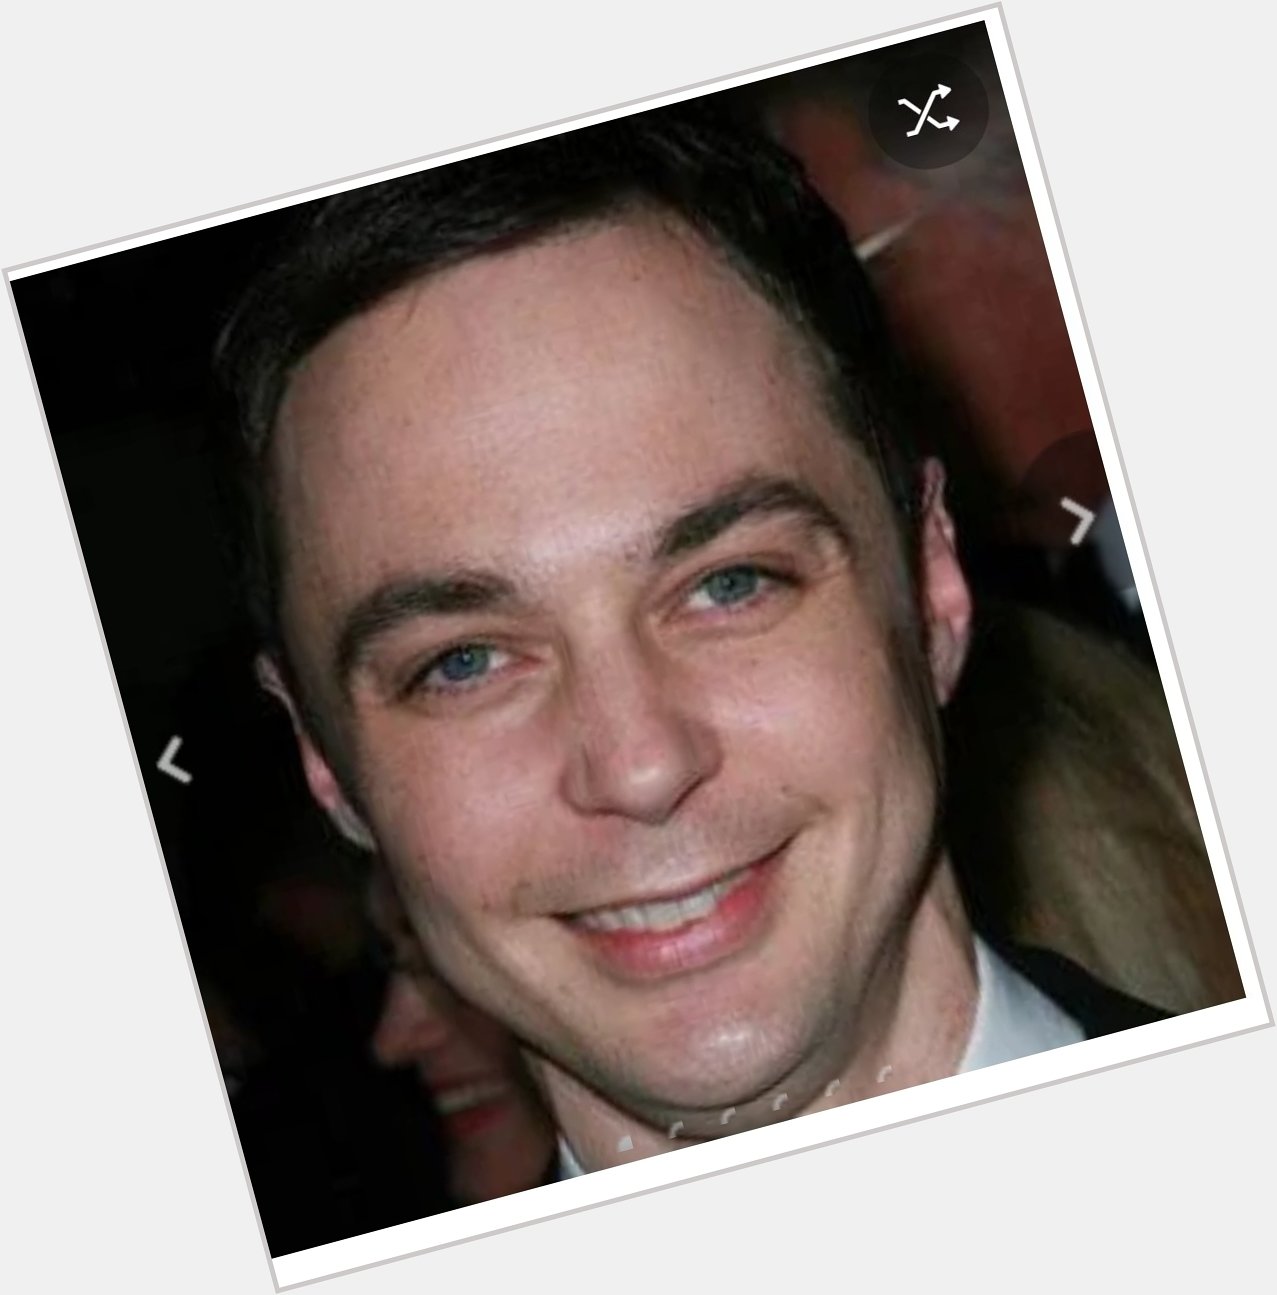 Happy birthday to a fabulous actor.  Happy birthday to Jim Parsons or Sheldon Cooper 